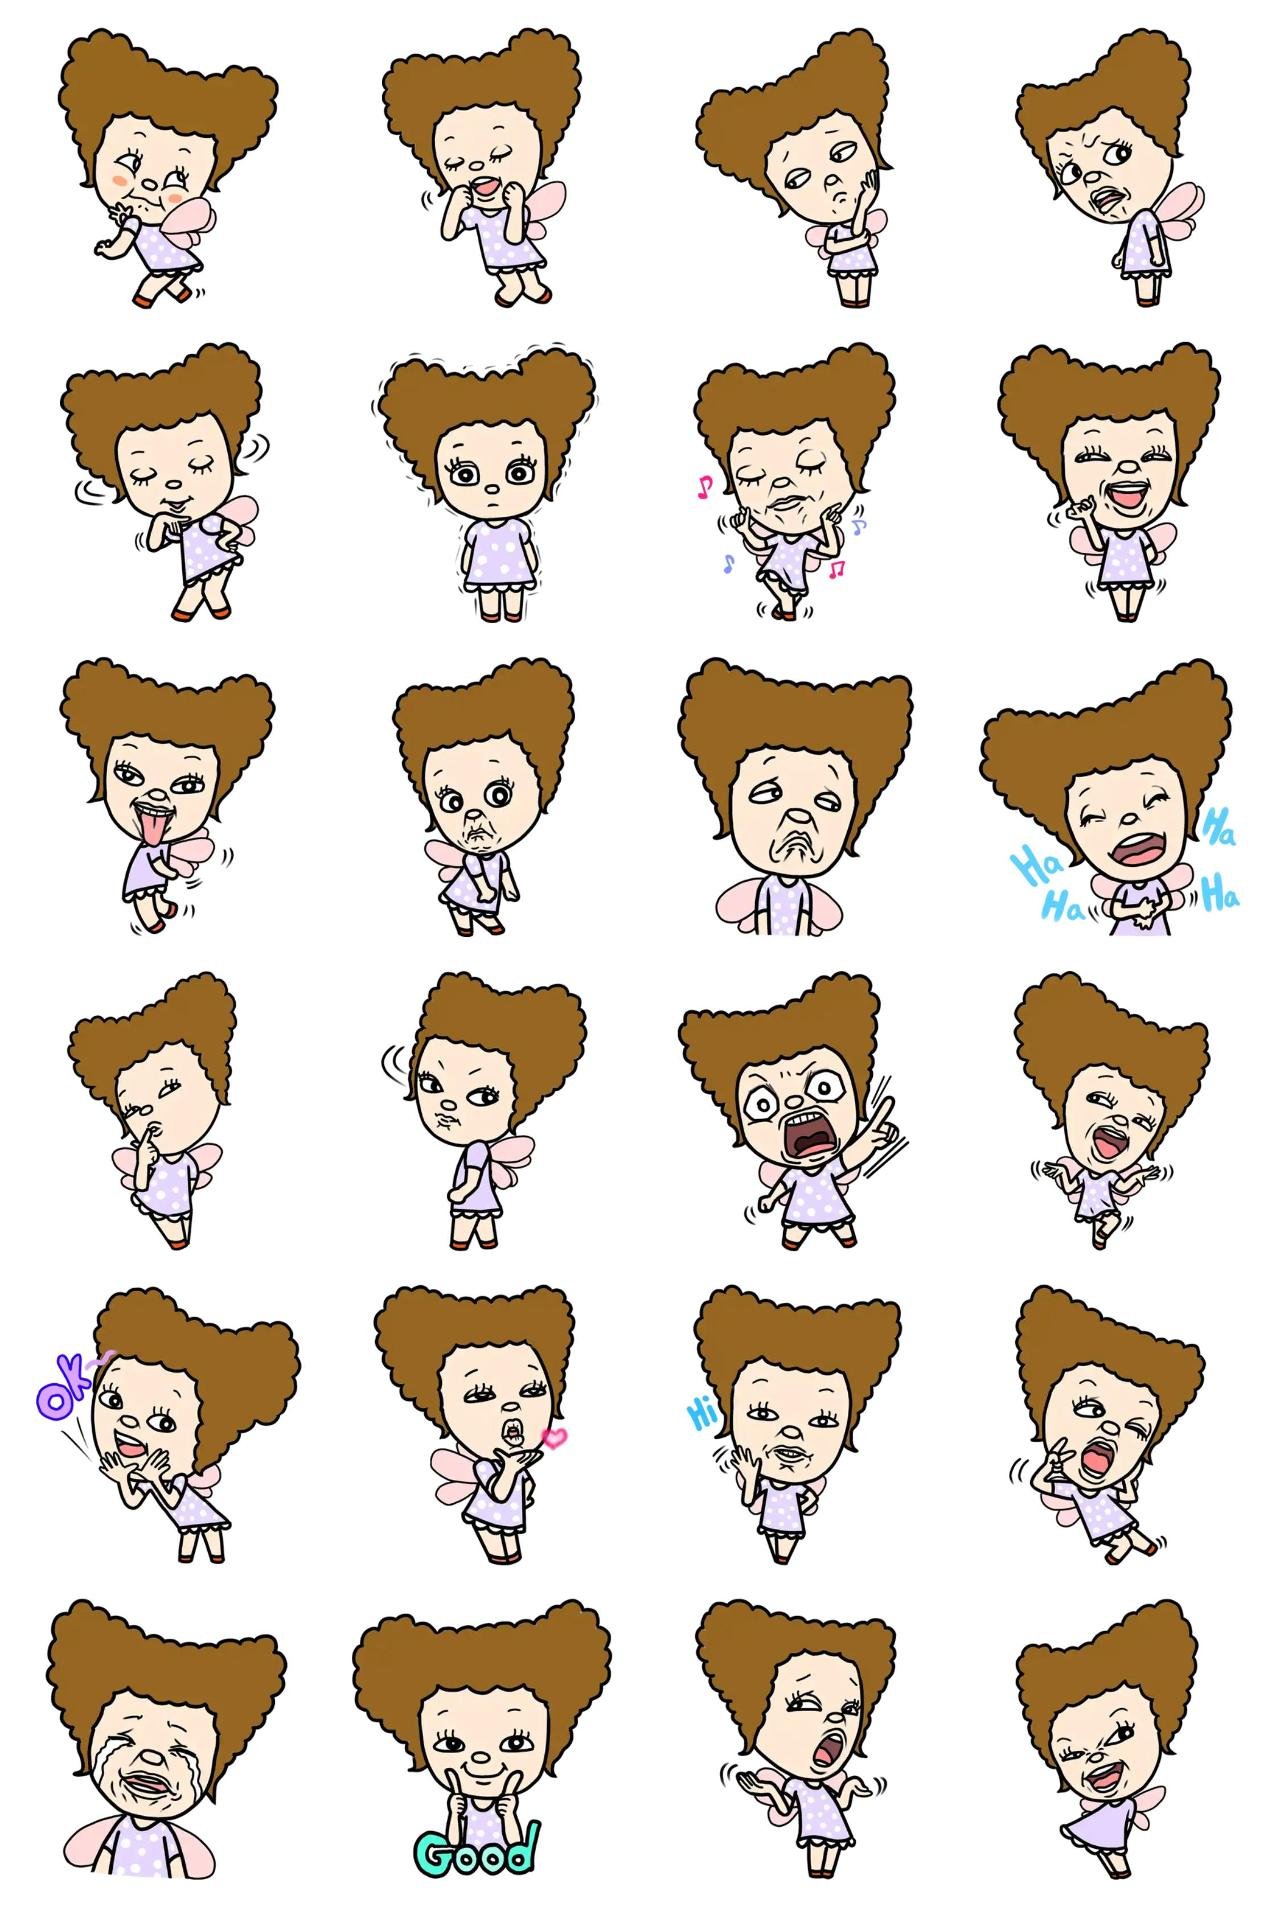 Fairy Rossi People sticker pack for Whatsapp, Telegram, Signal, and others chatting and message apps